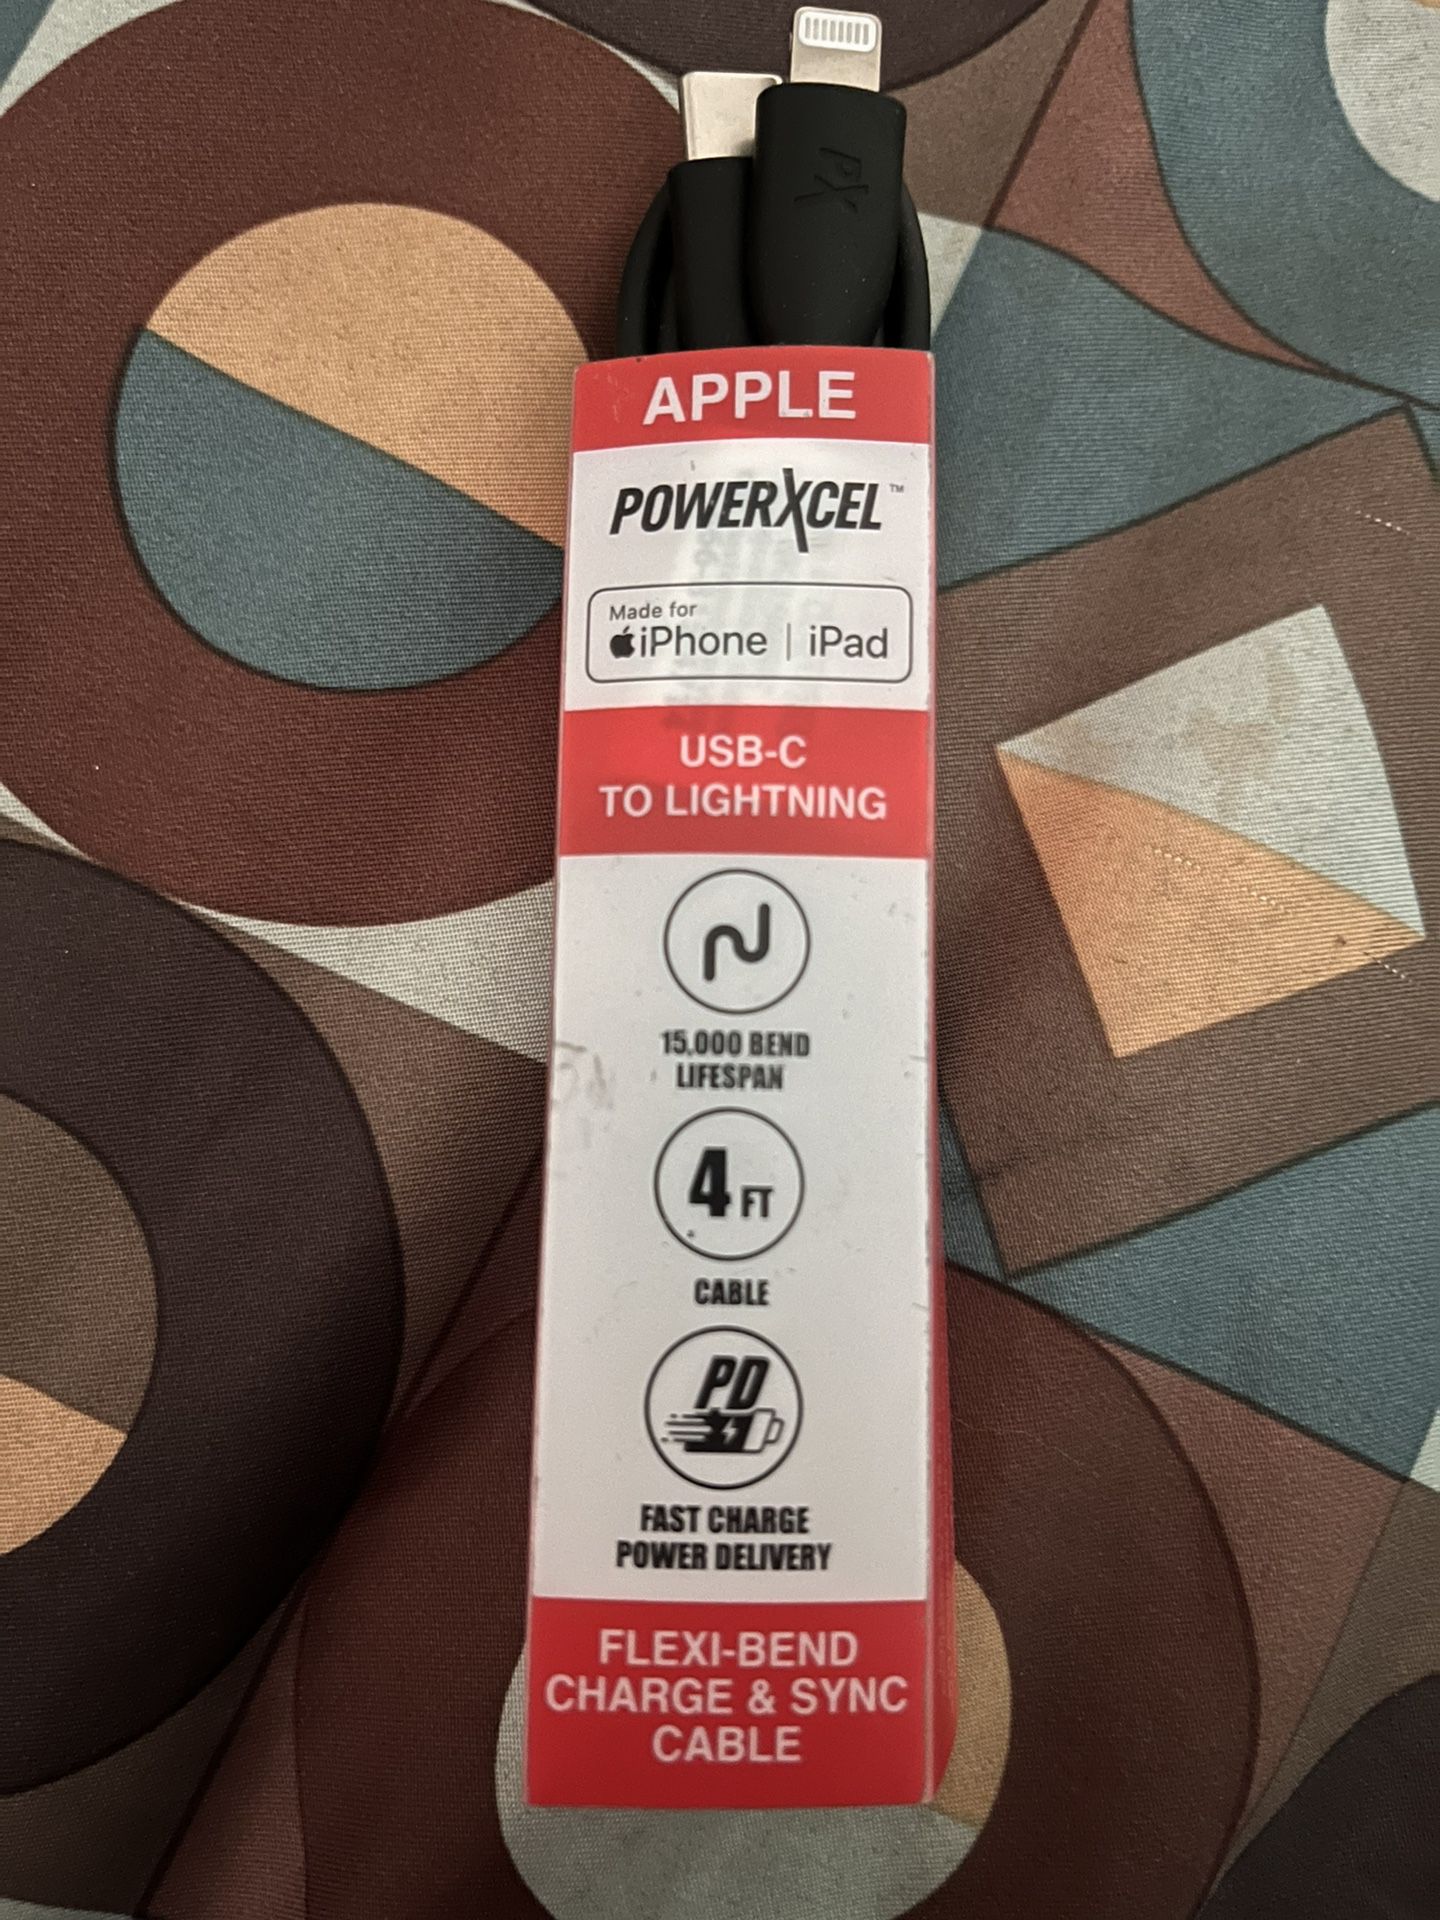 POWERXCELL APPLE IPHONE CHARGER